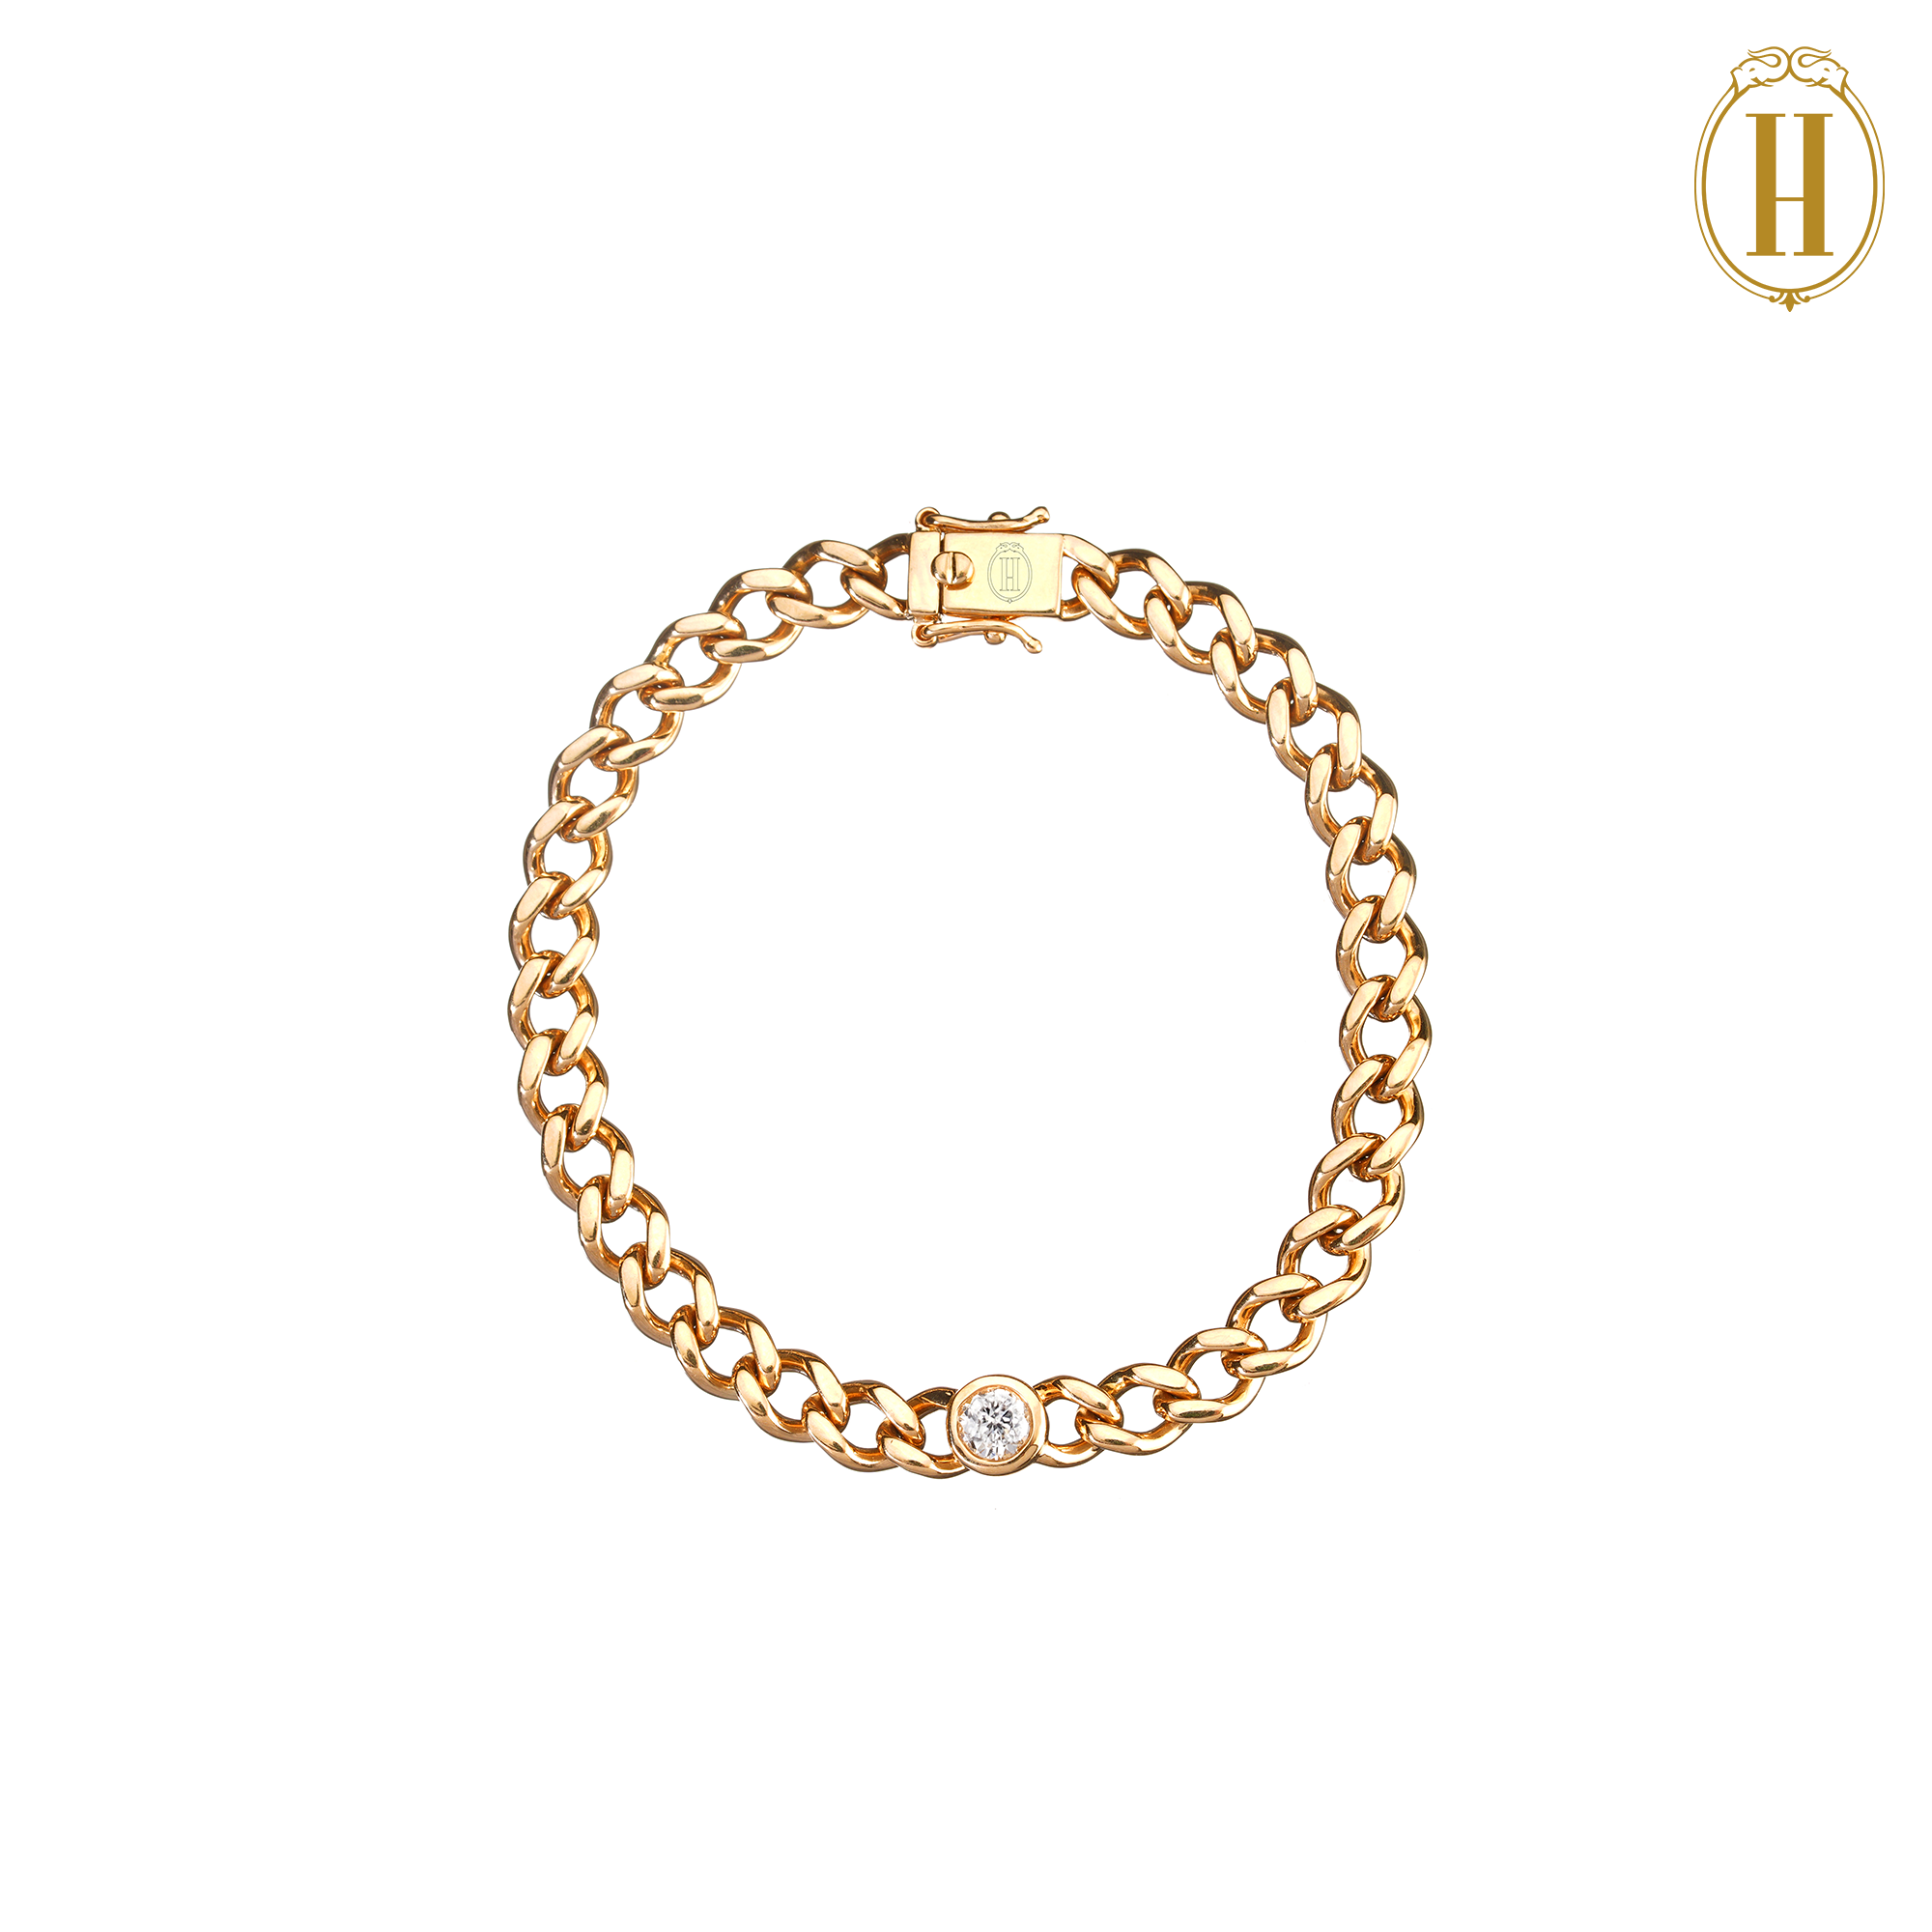 Buy Yellow Chimes AD Bracelet for Women Rhodium-Plated White American  Diamond AD-Studded Circular Chain Bracelet For Women and Girls at Amazon.in